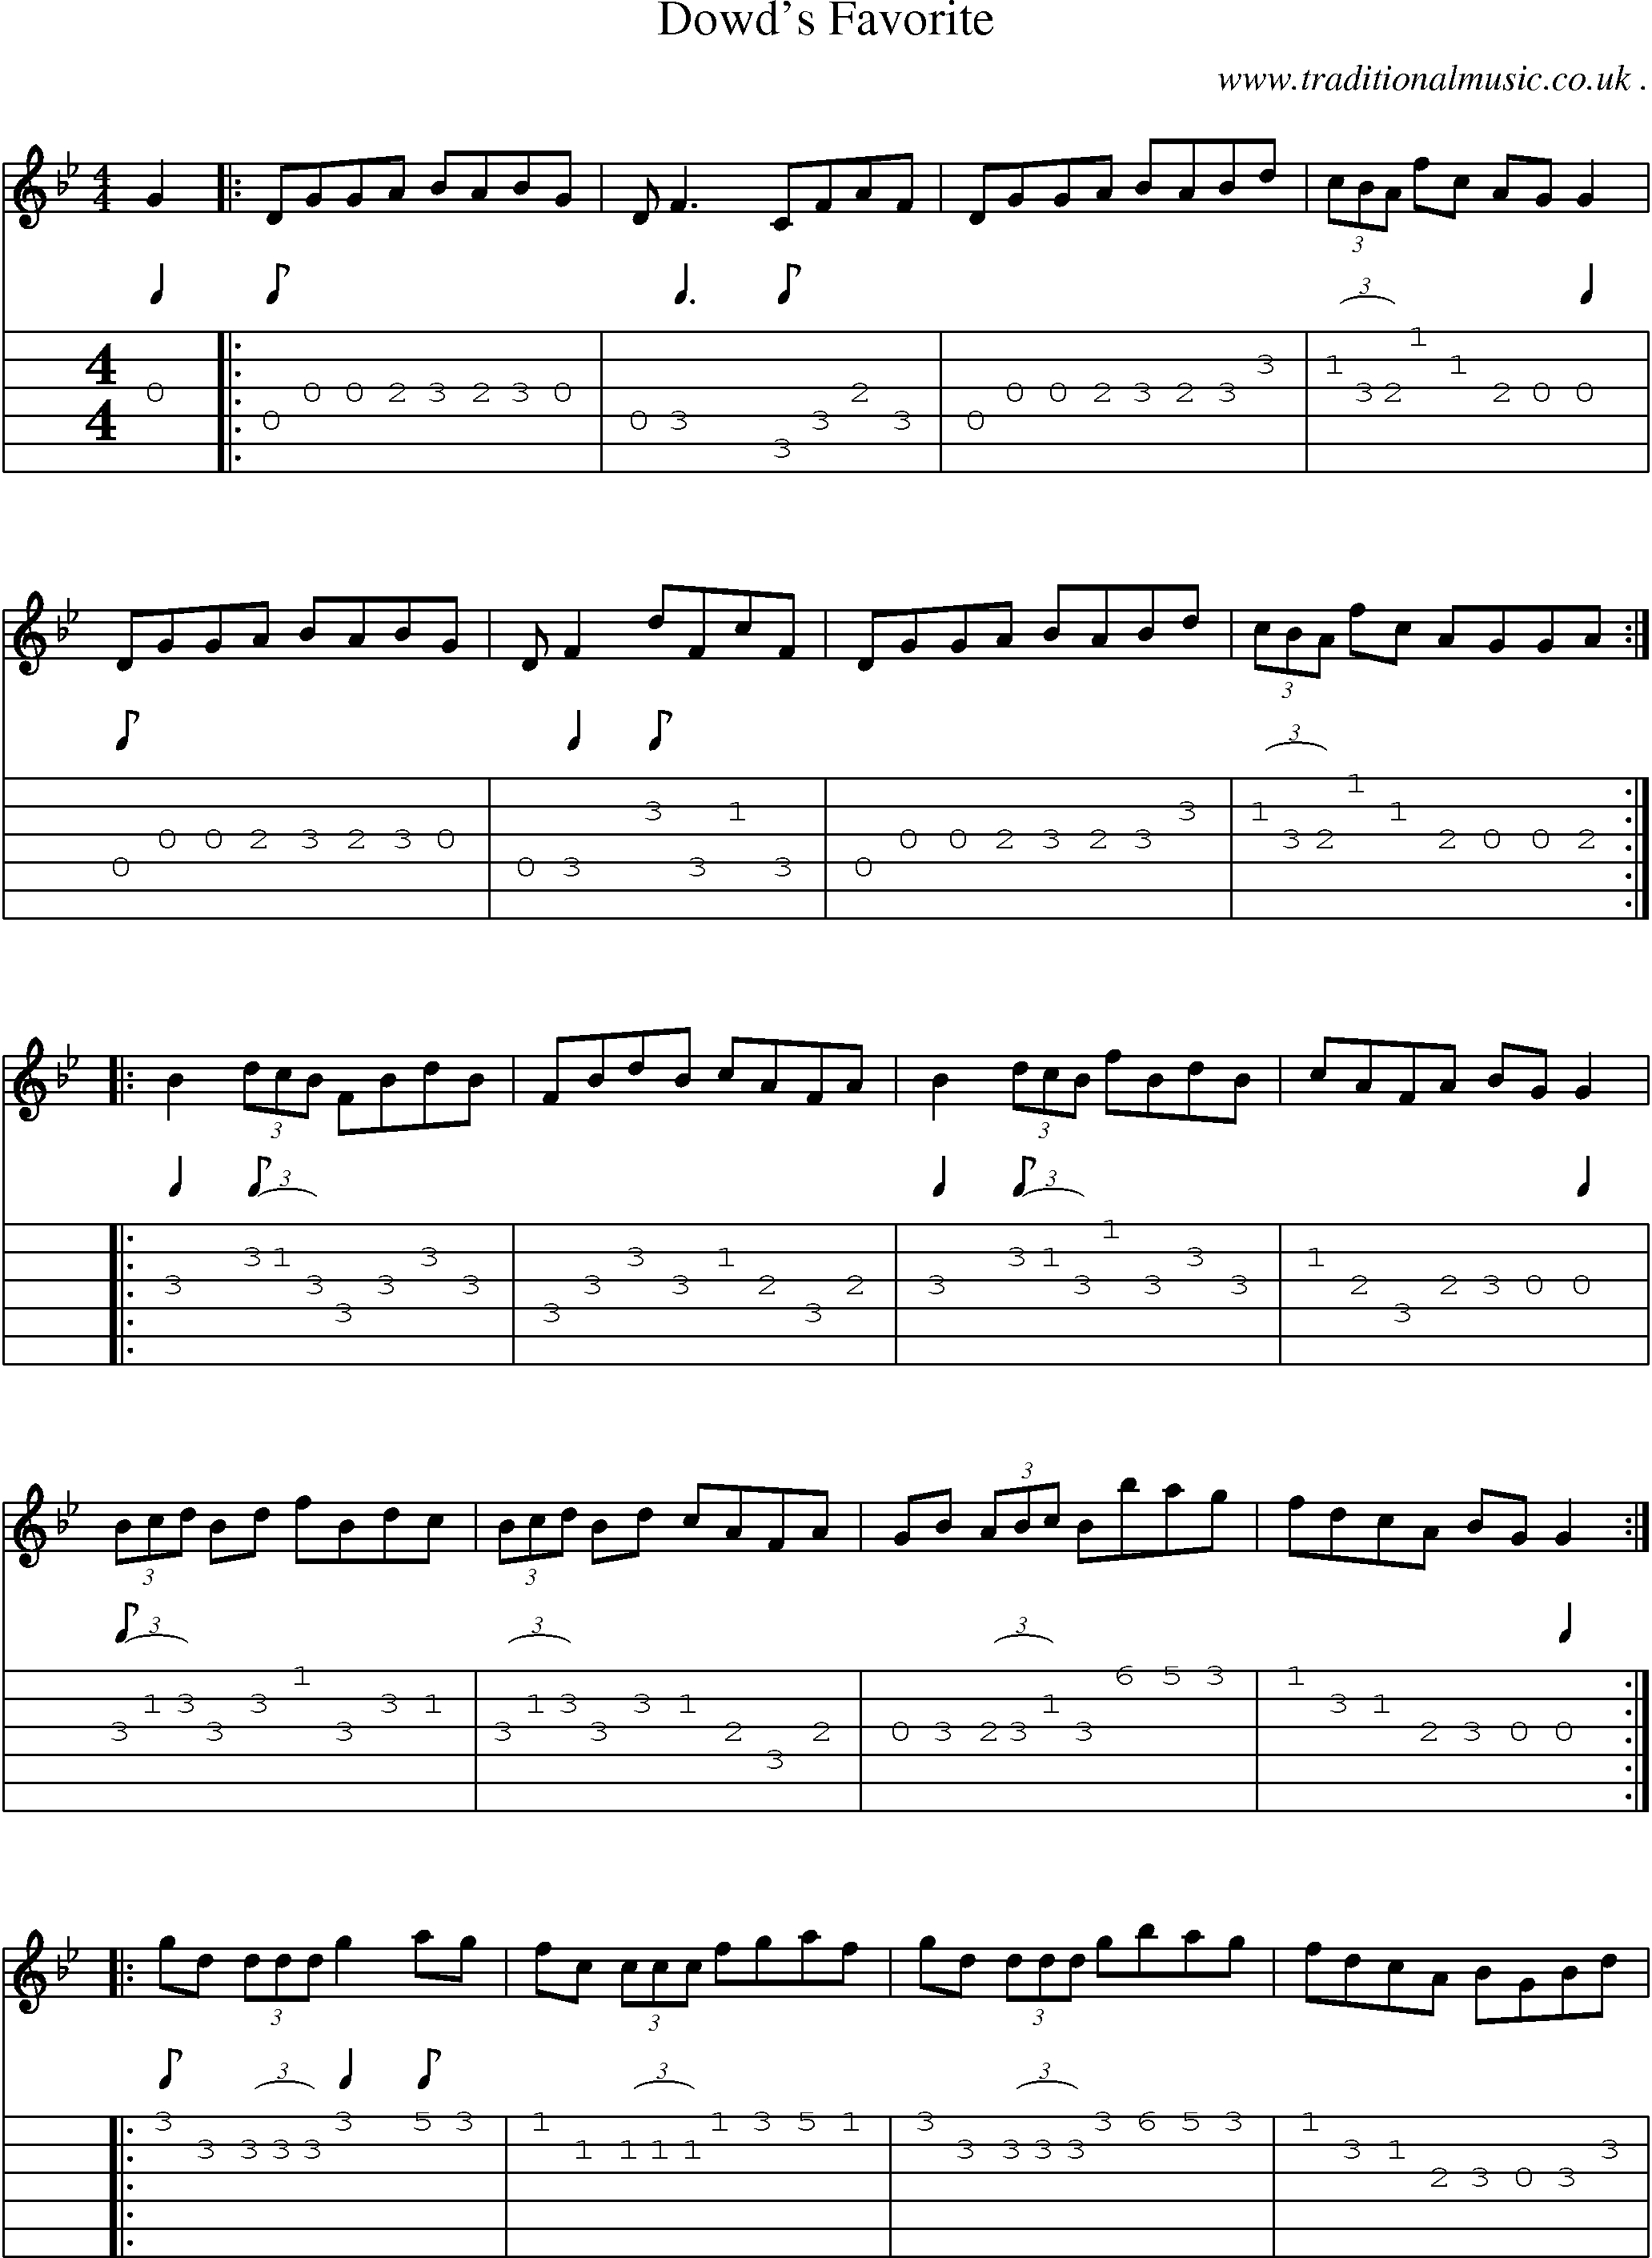 Sheet-Music and Guitar Tabs for Dowds Favorite